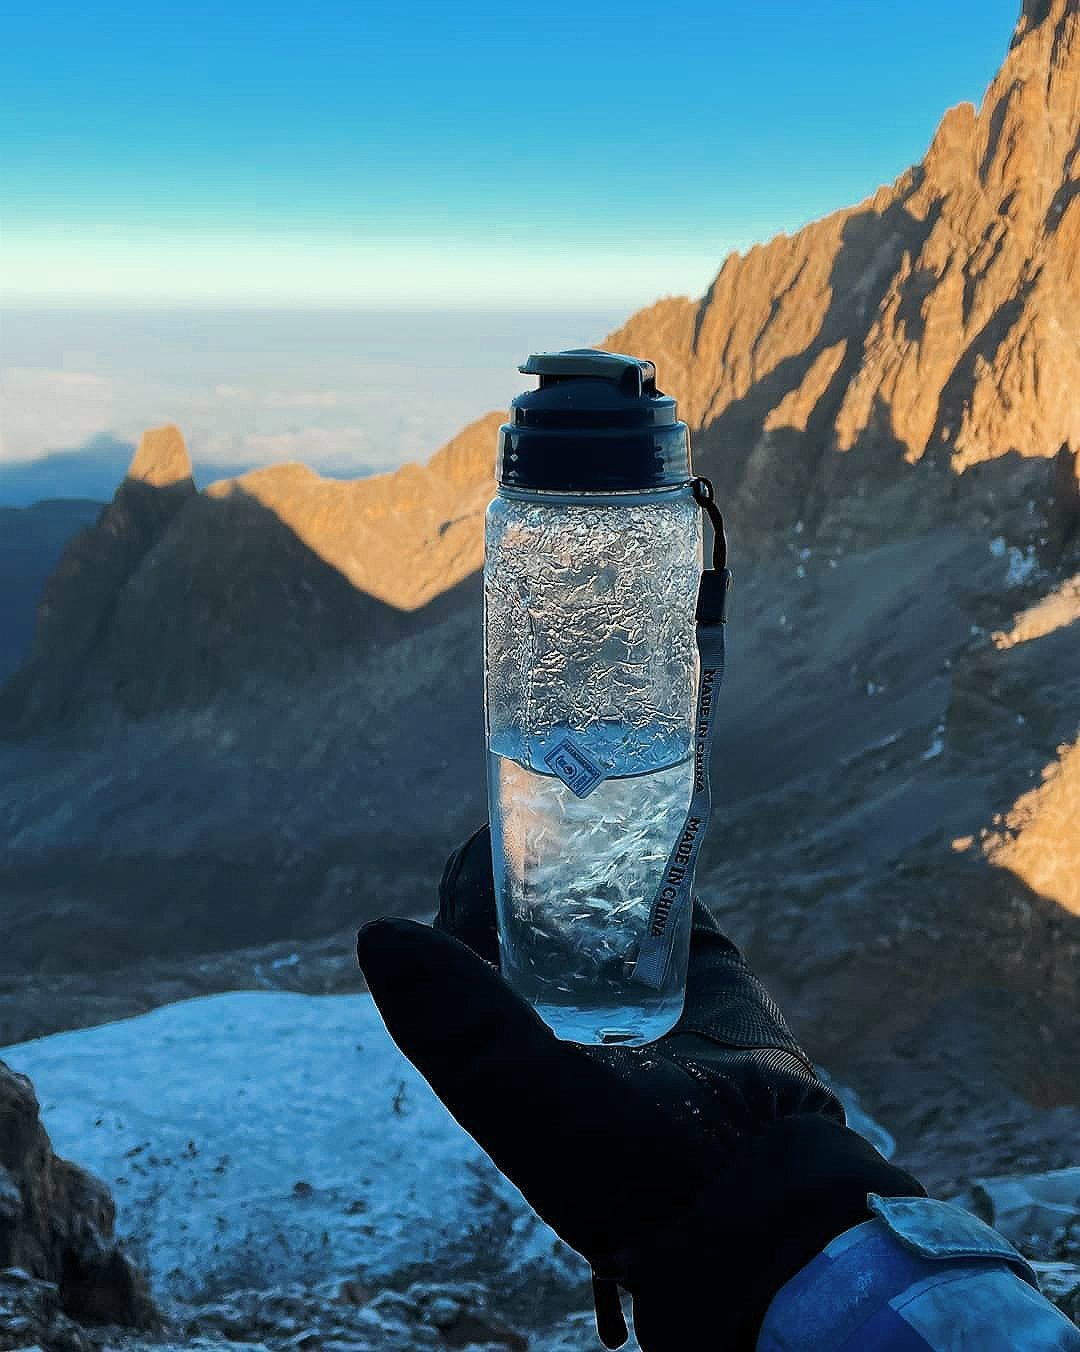 Hydration: Best Practices for Hiking